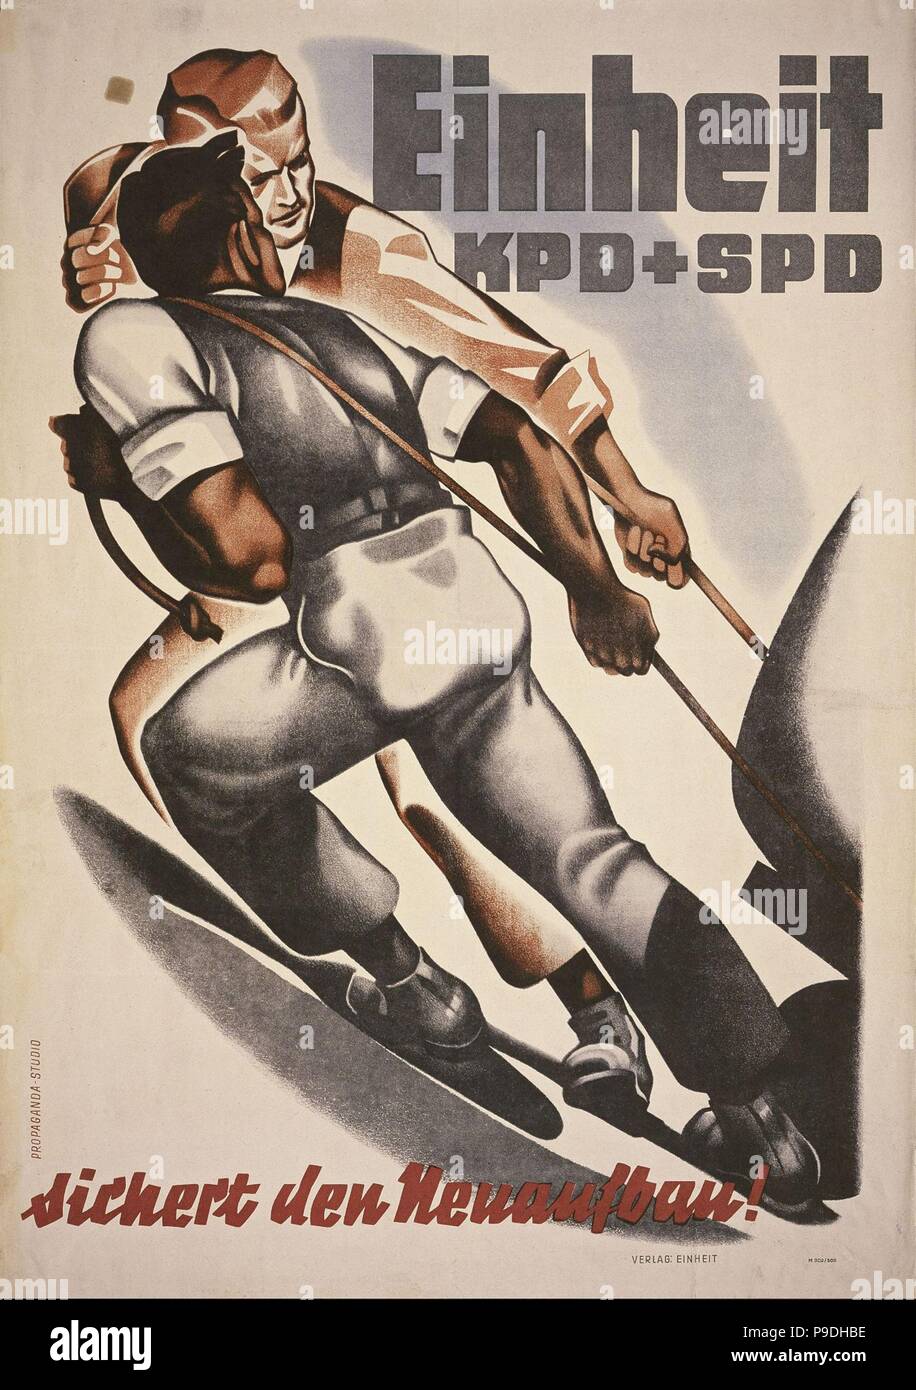 Unit of the KPD and SPD ensures the reconstruction! Propaganda poster to Merger of the KPD and SPD. Museum: PRIVATE COLLECTION. Stock Photo